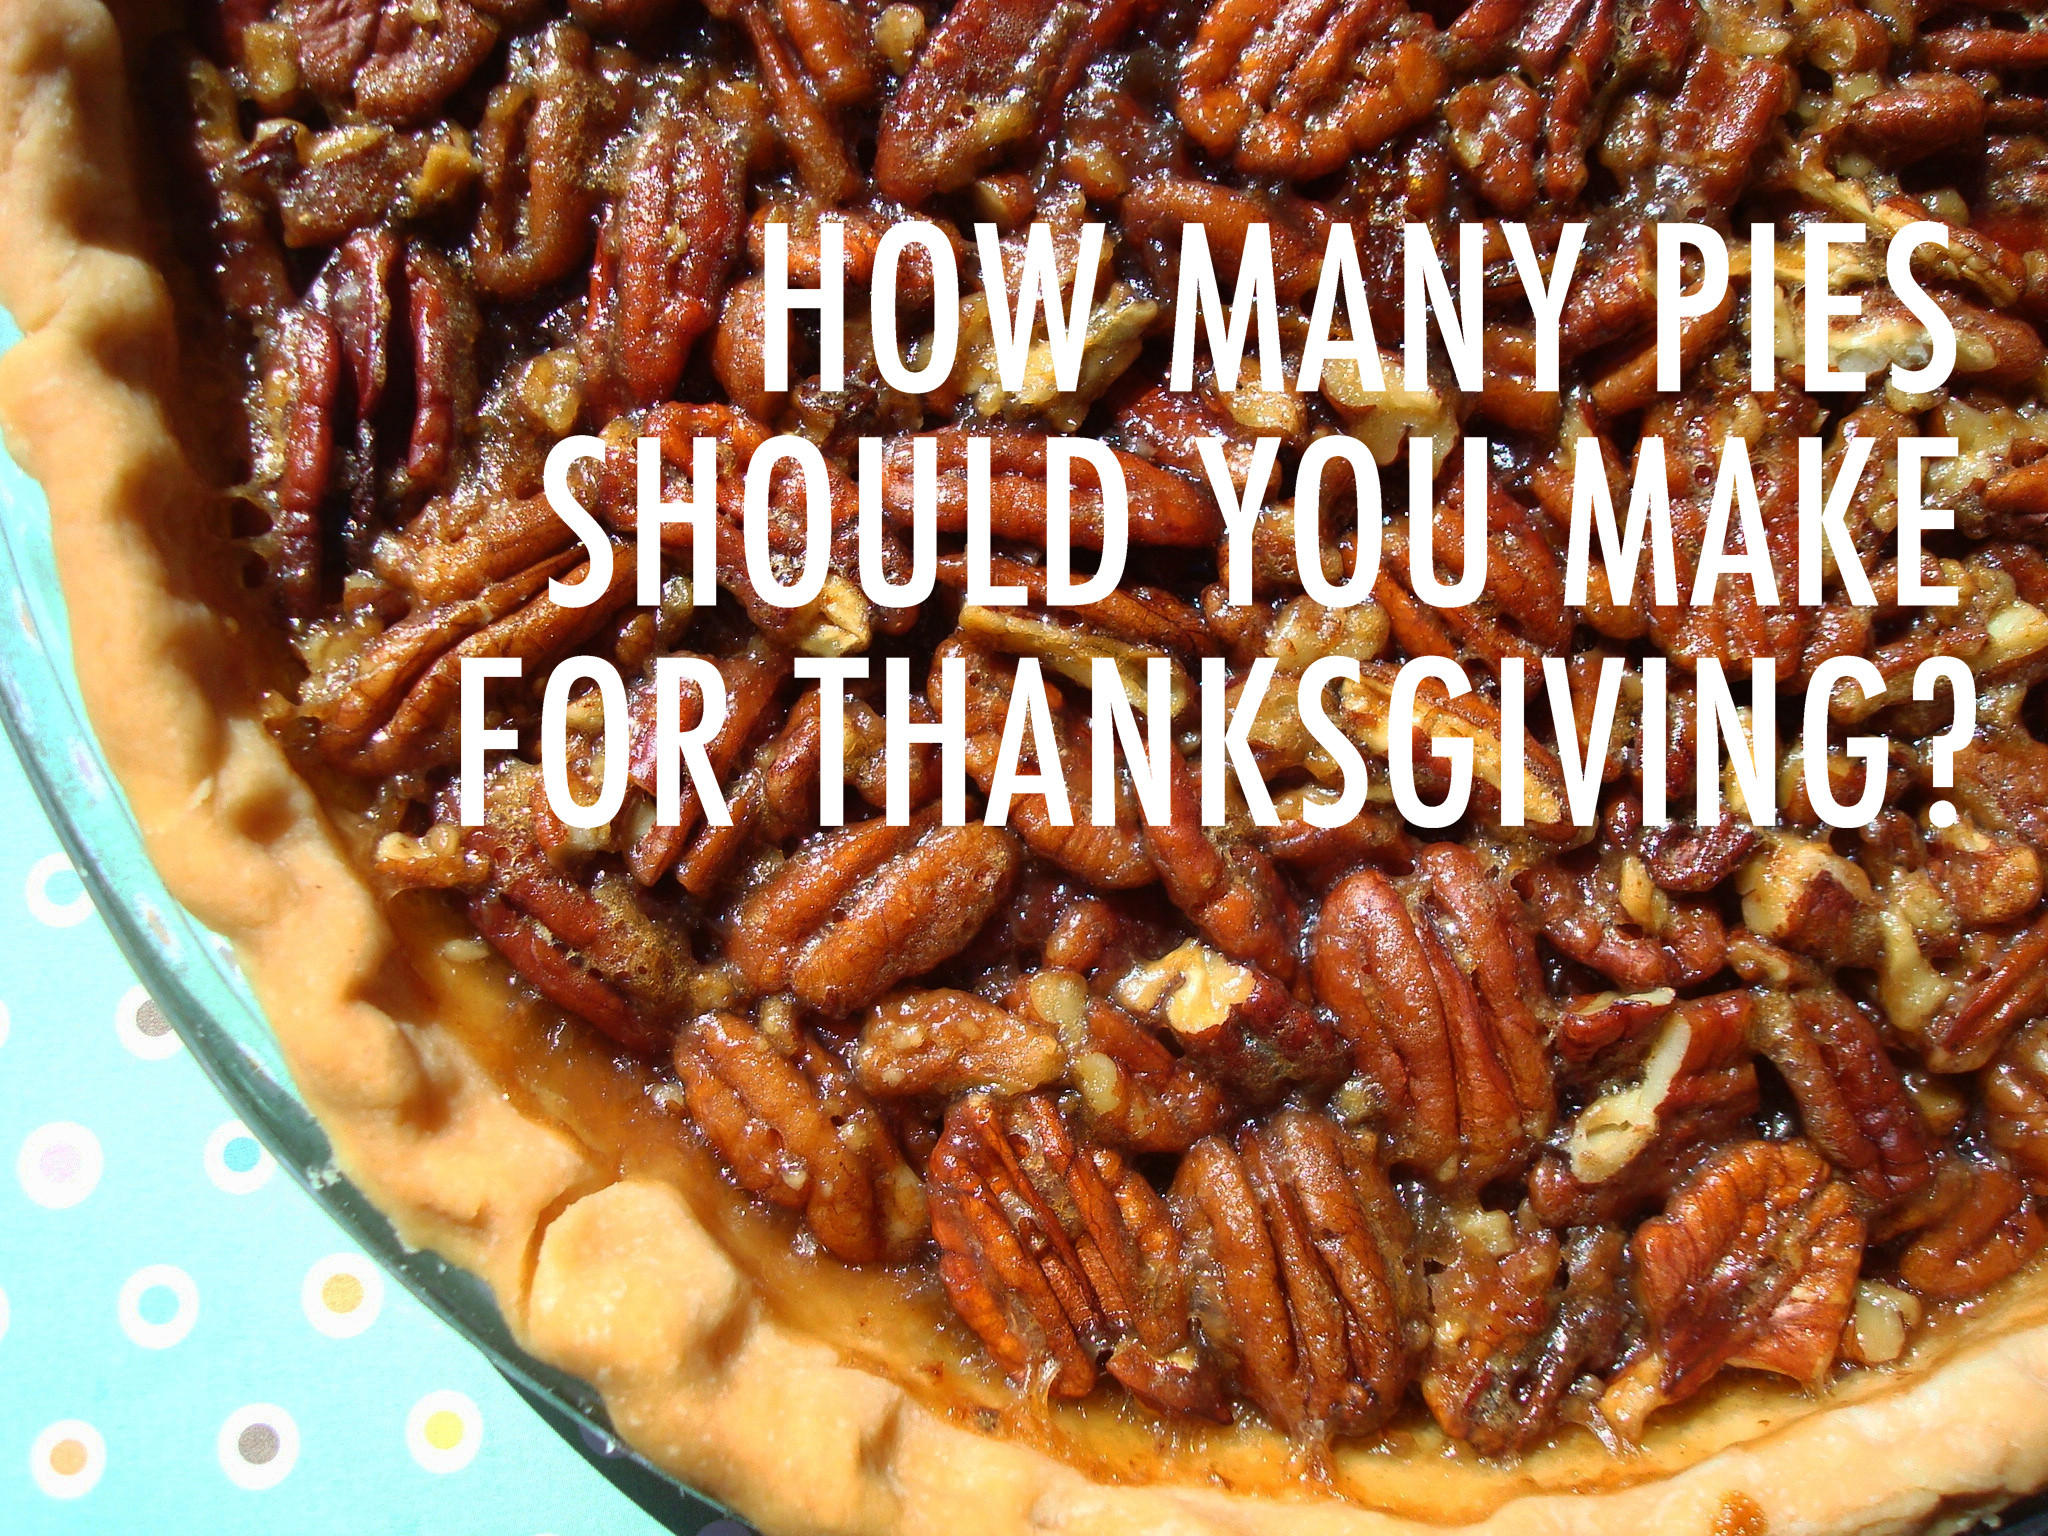 Pies To Make For Thanksgiving
 How Many Pies Should You Make for Thanksgiving